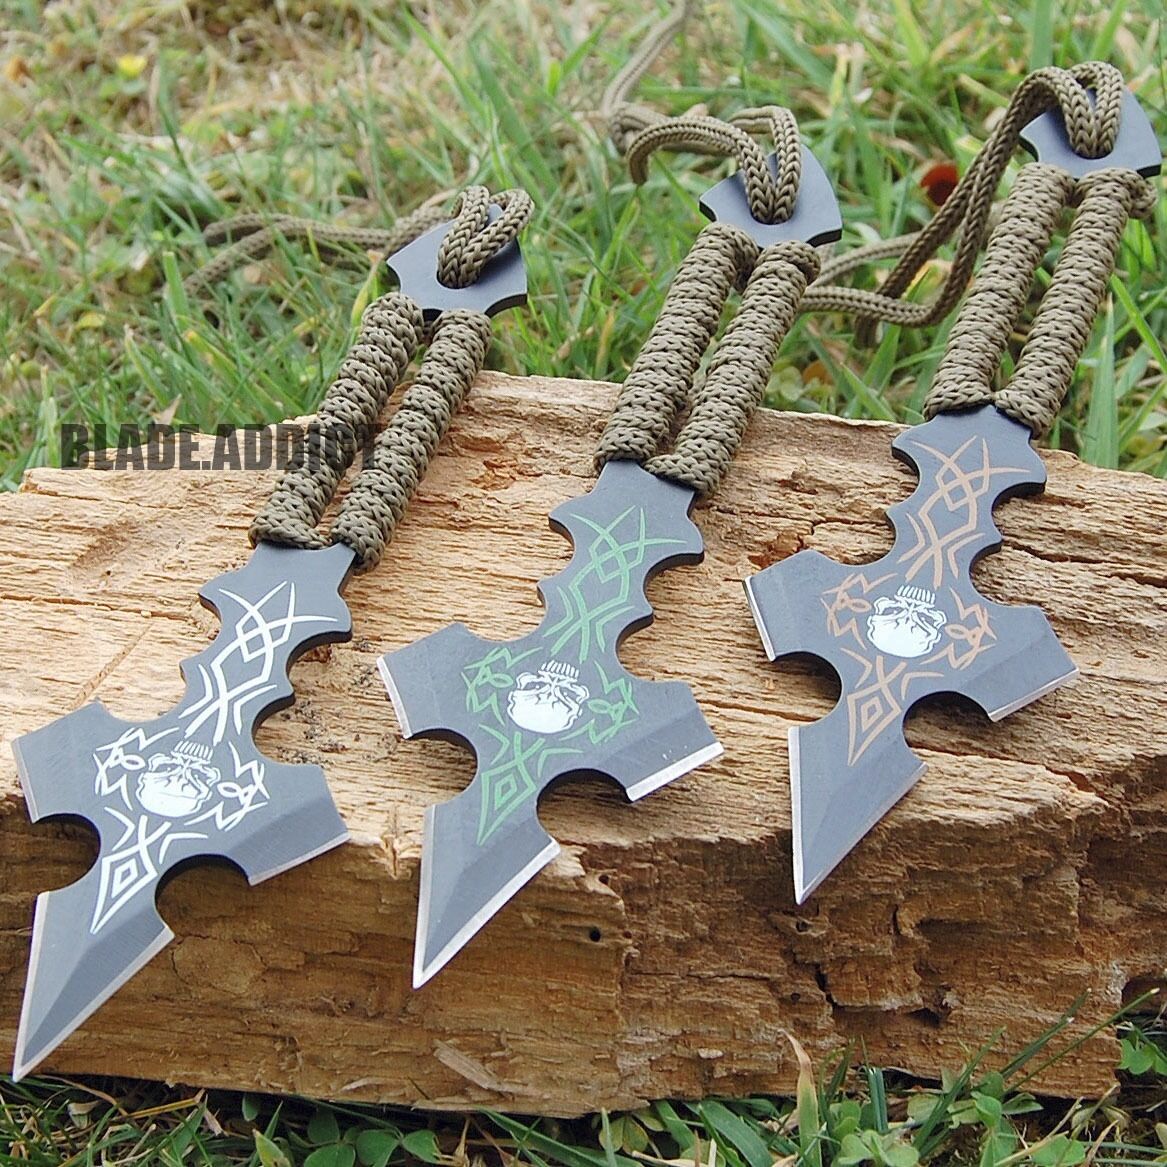 Naruto - Throwing Knife Set - Fire and Steel